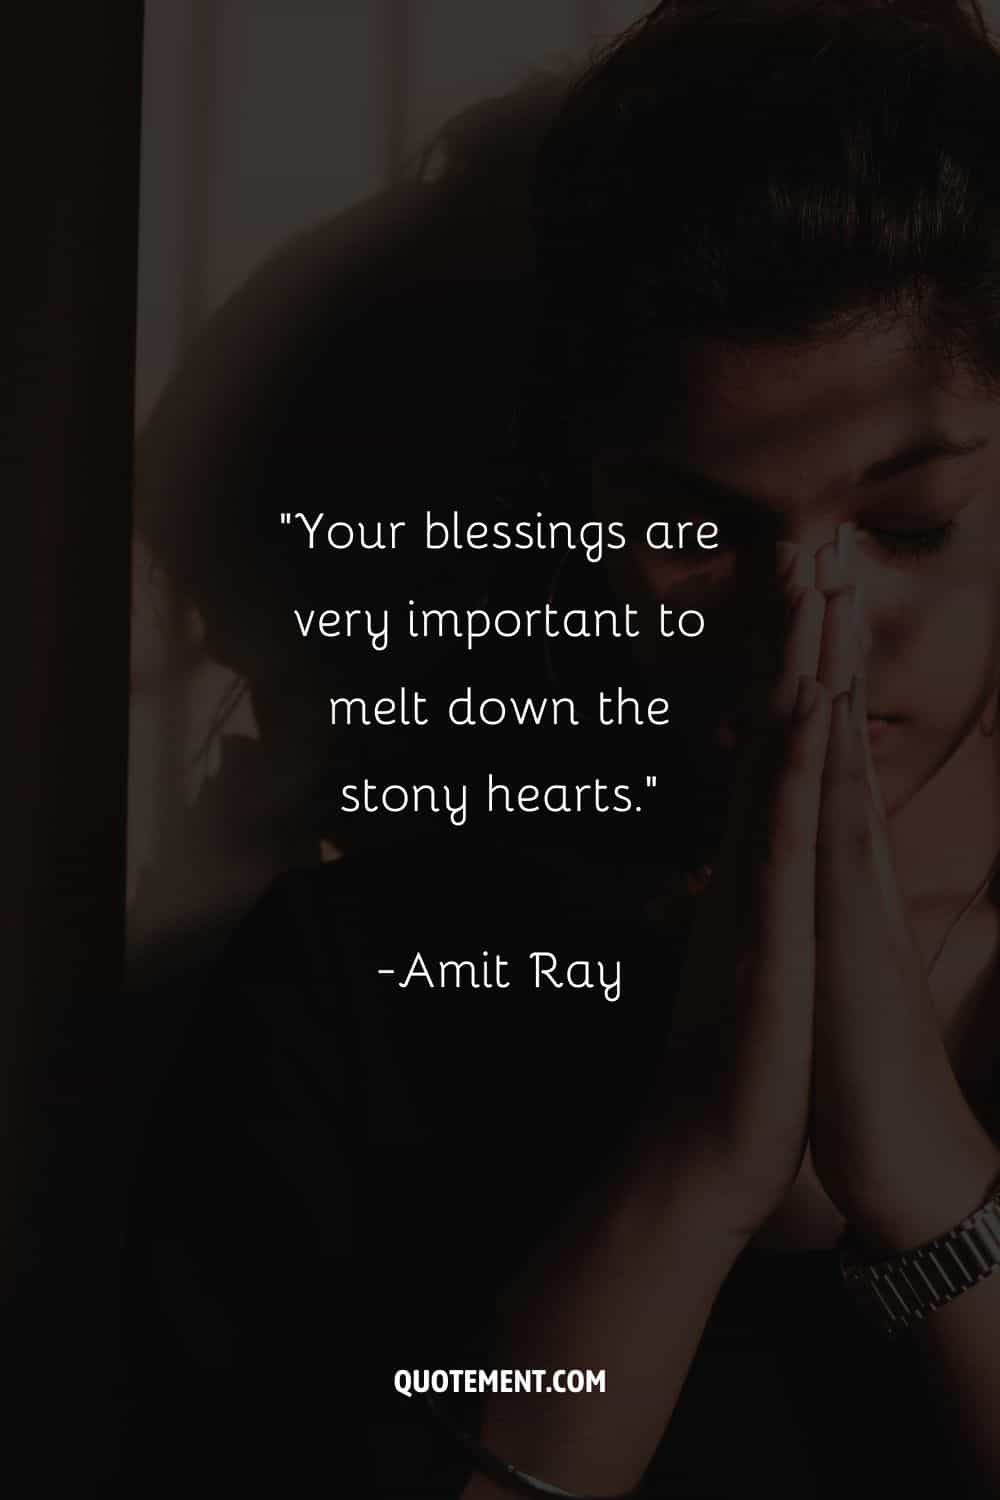 “Your blessings are very important to melt down the stony hearts.”